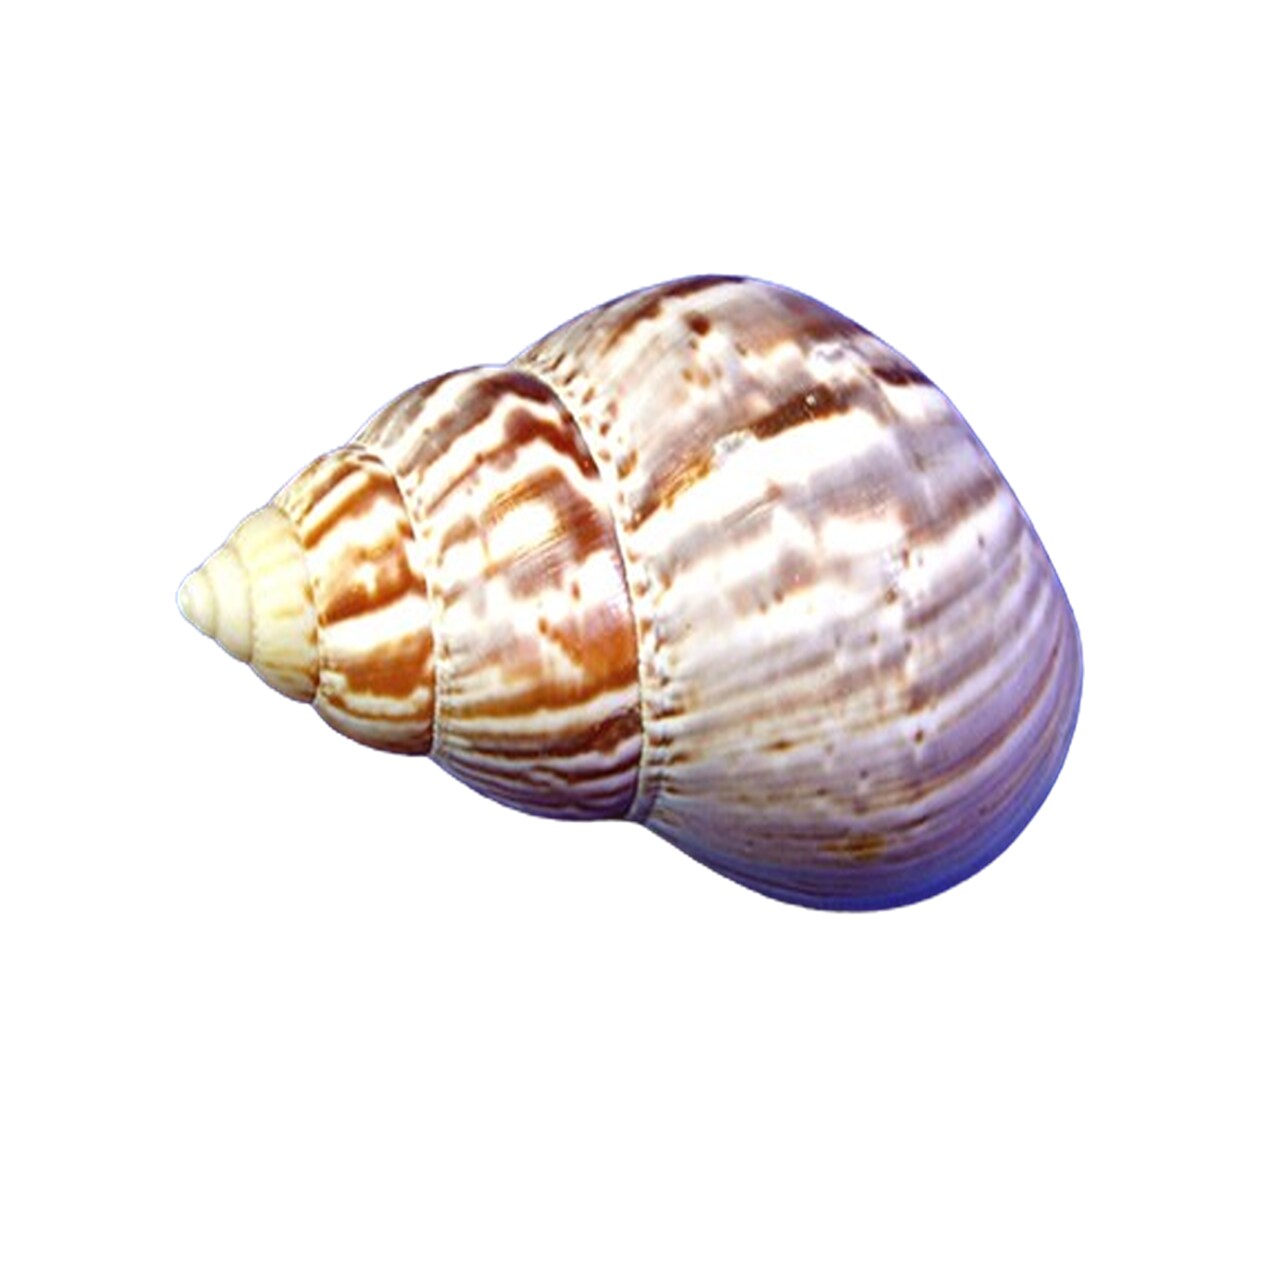 Florida Shells and Gifts 3 inches Heavy Hermit Crab Shell